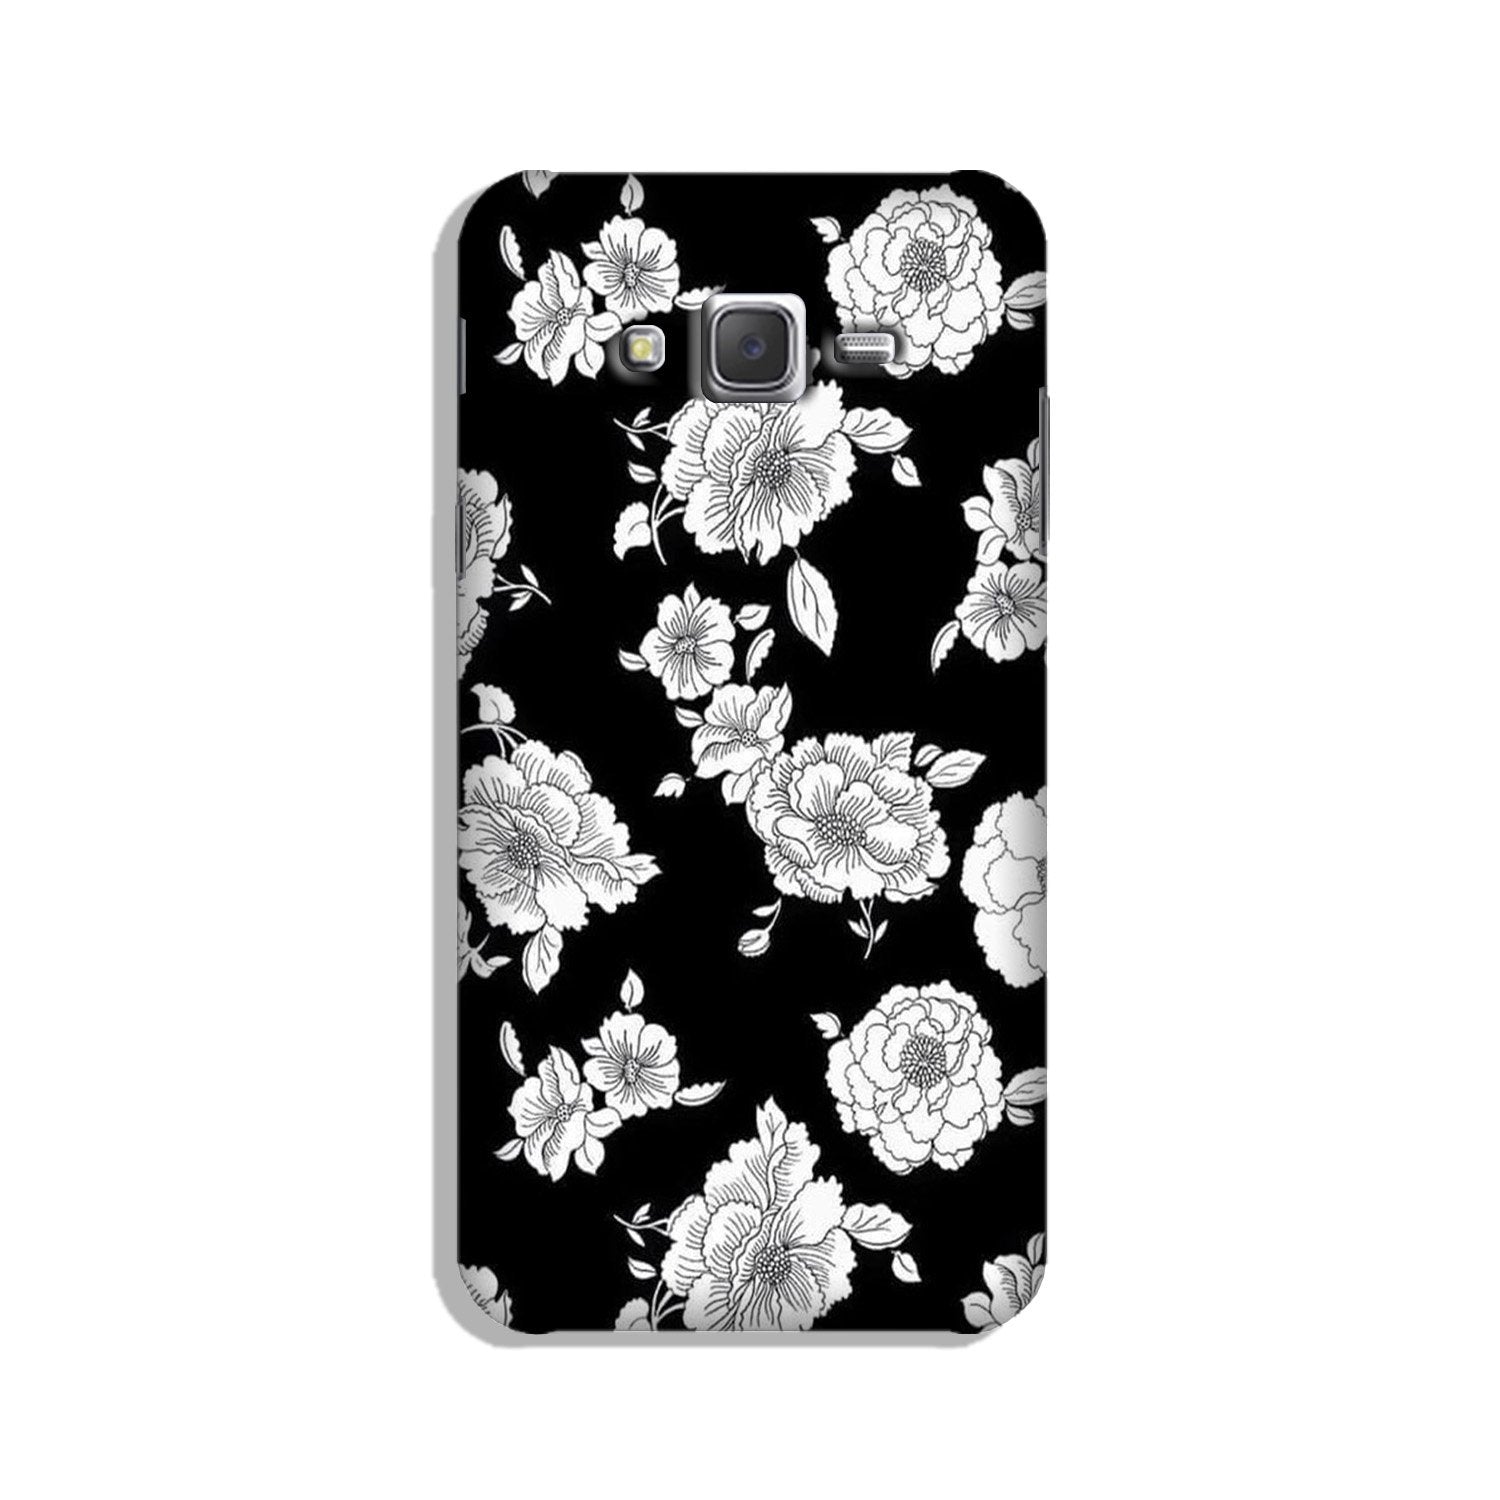 White flowers Black Background Case for Galaxy J7 (2015)